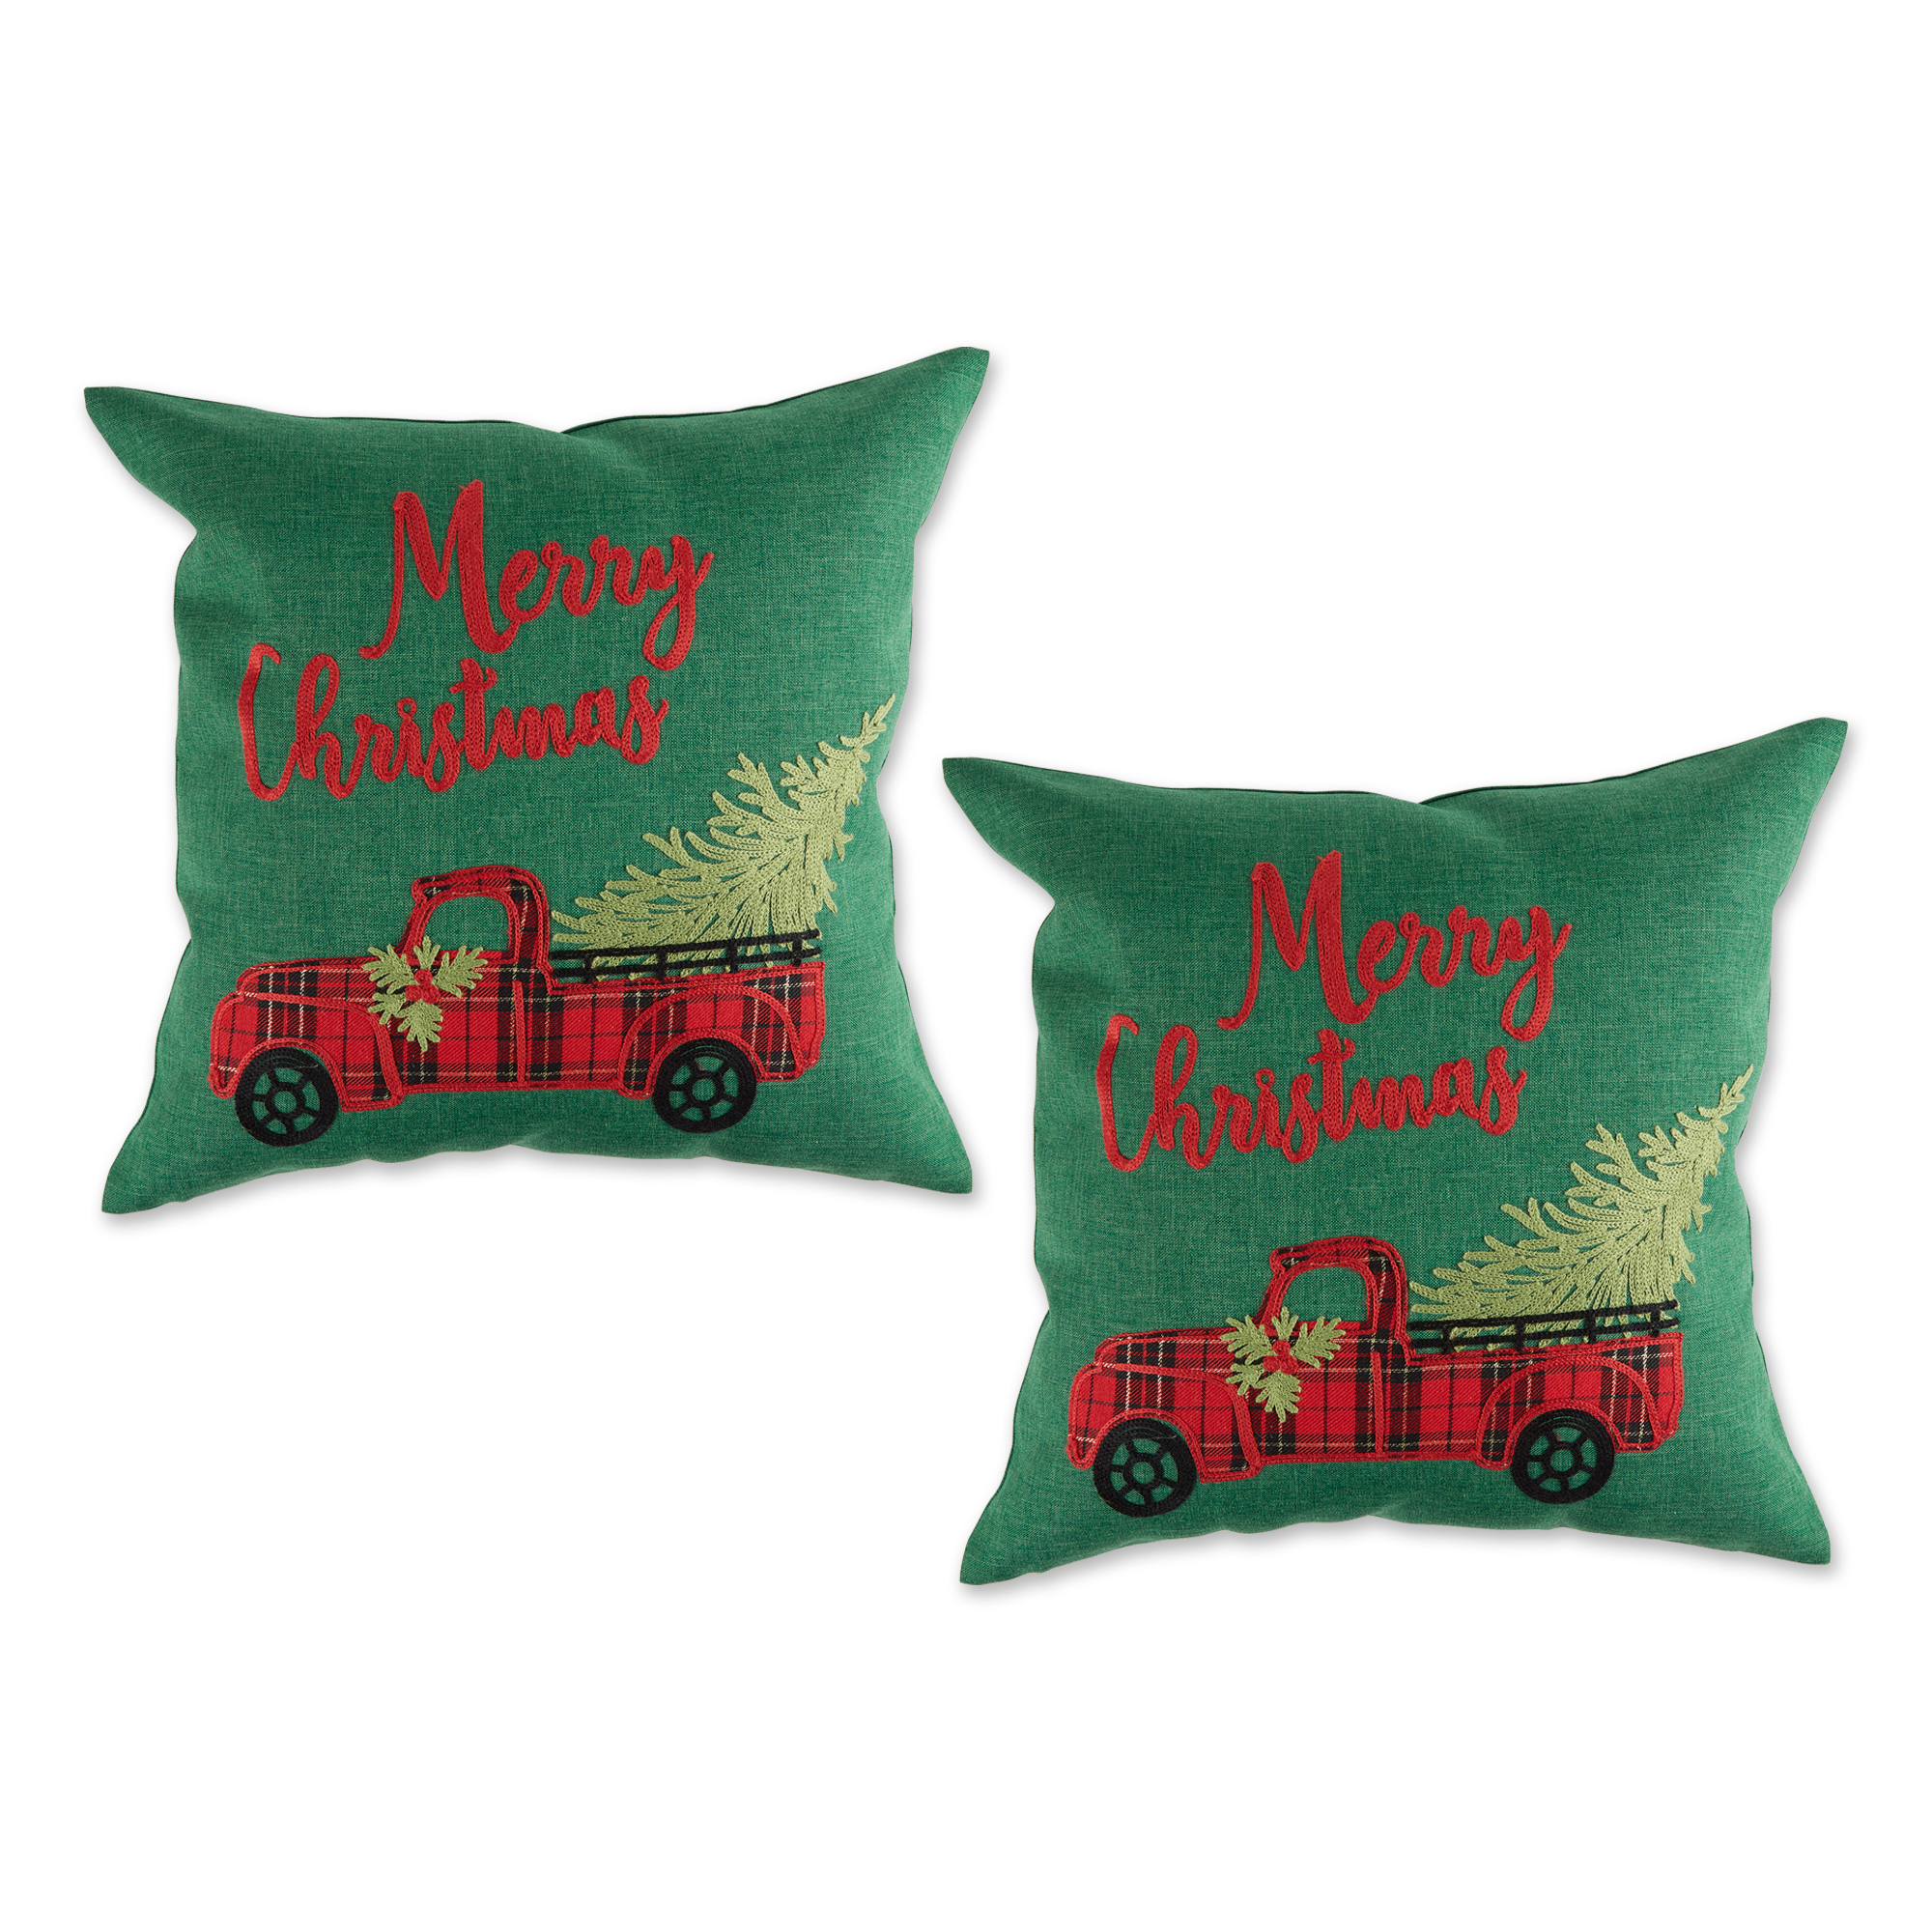 Contemporary Home Living "Merry Christmas" with Truck Outdoor Patio Throw Pillow Covers - 18" - Set of 2